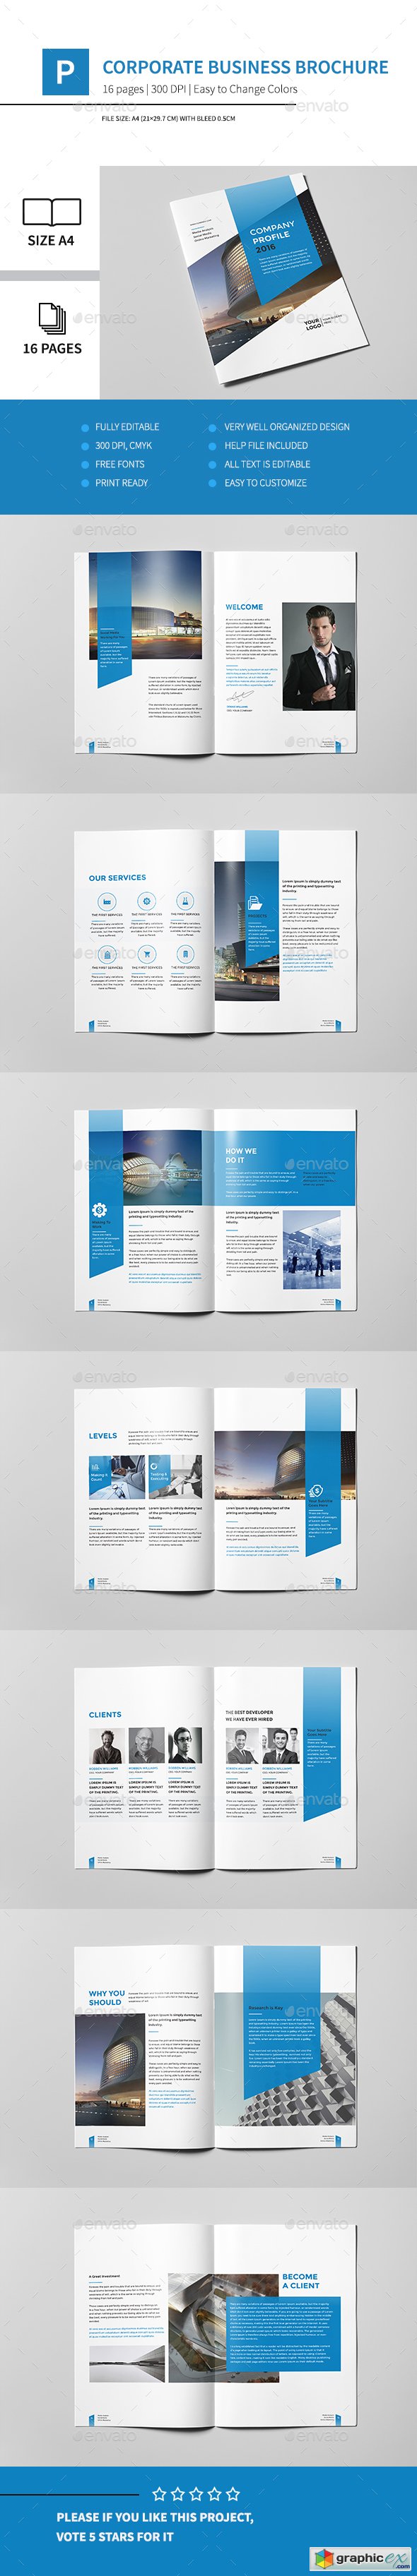 Corporate Business Brochure 16 Pages A4 14539762